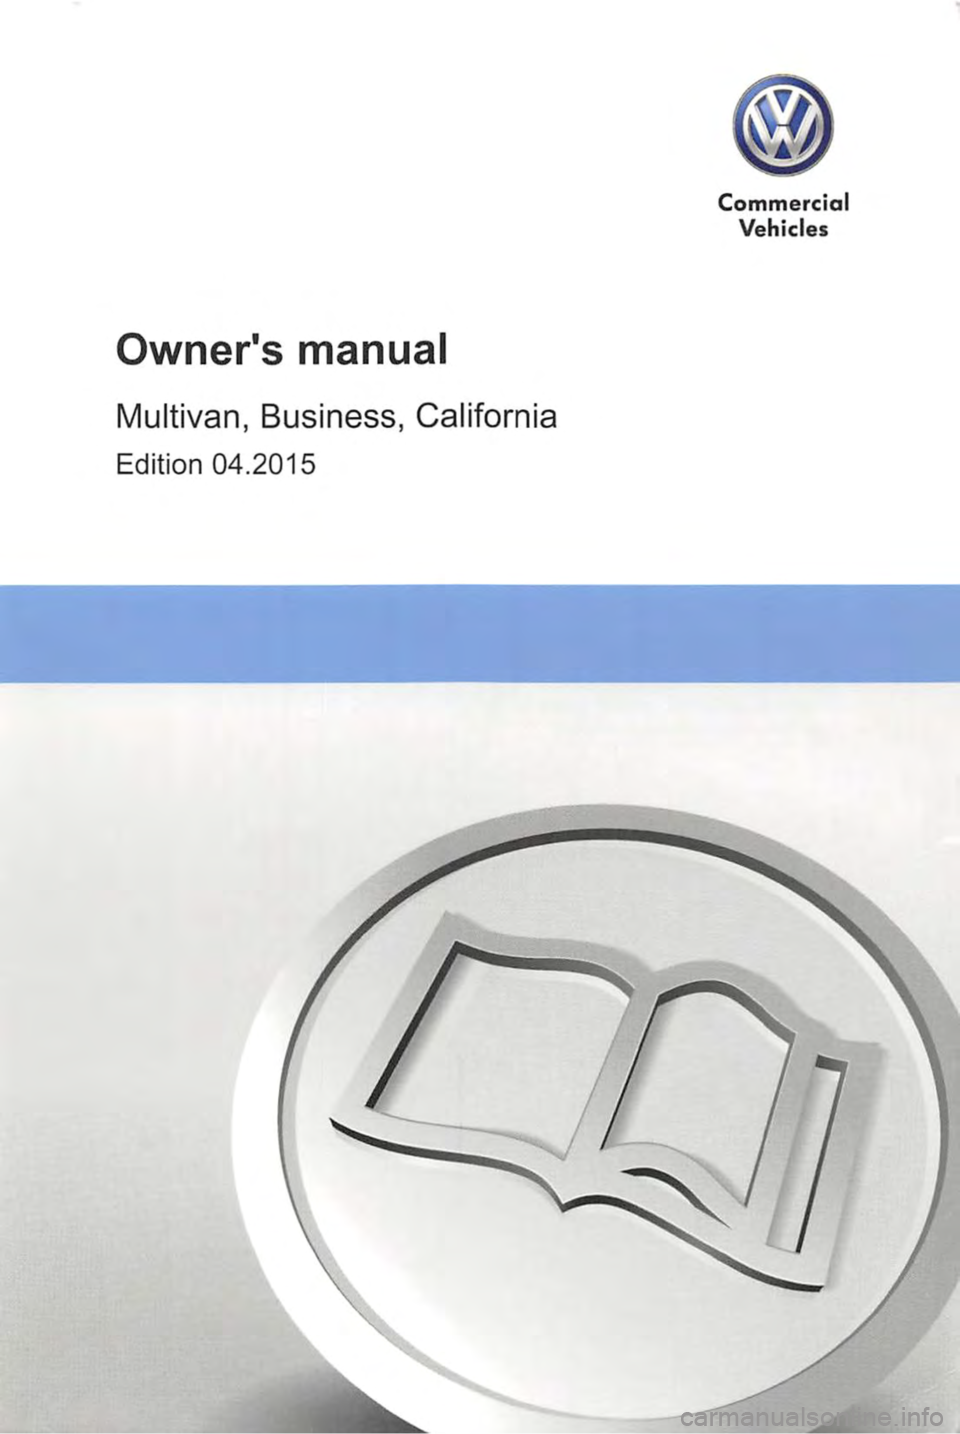 VOLKSWAGEN TRANSPORTER 2011  Owners Manual Owners manual 
Multivan, Business, California 
Edition 04.2015 
Commercial 
Vehicles  